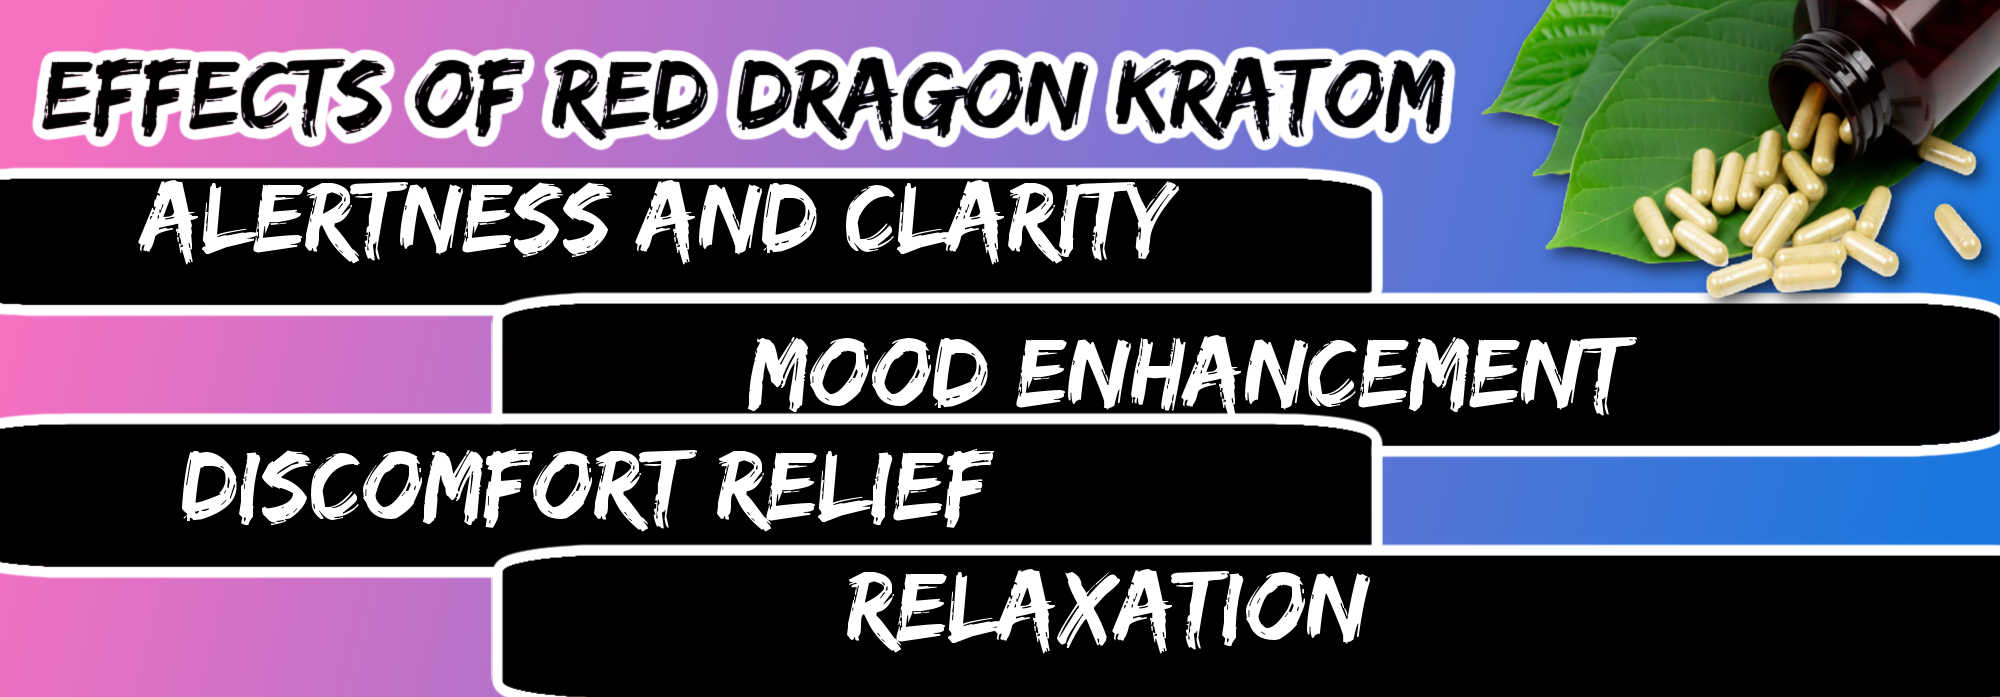 image of red dragon kratom effects